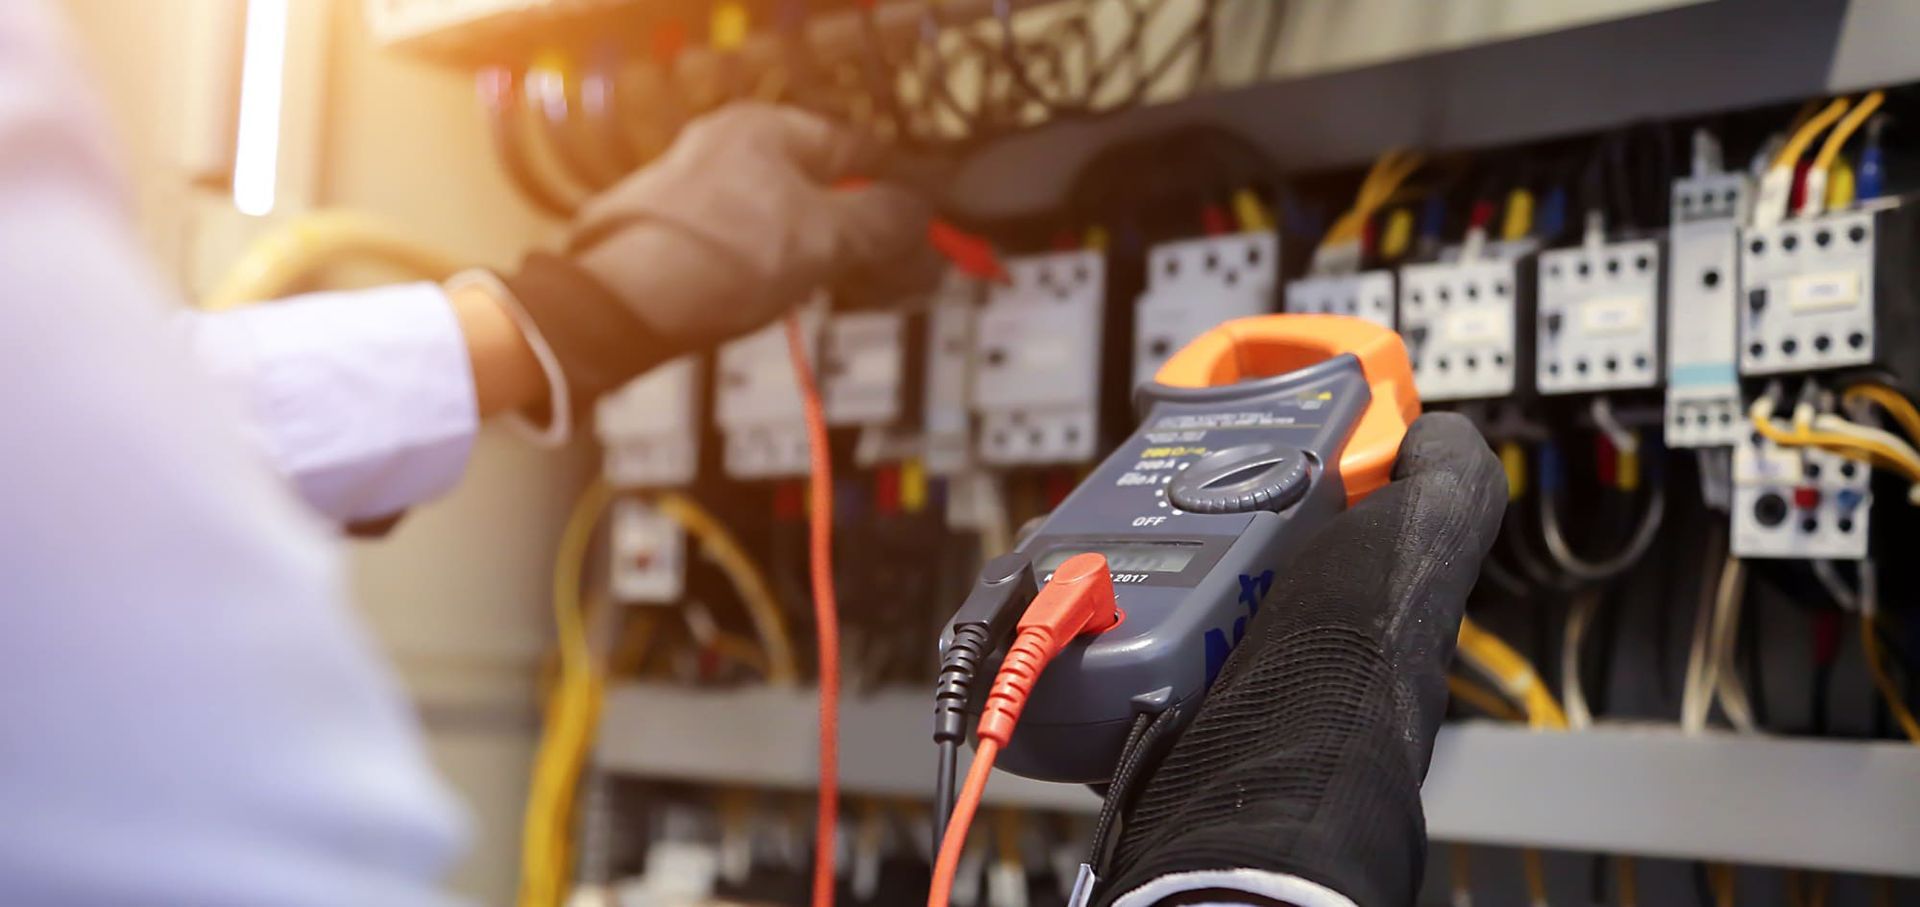 An electrician is using a clamp meter to test a circuit board.